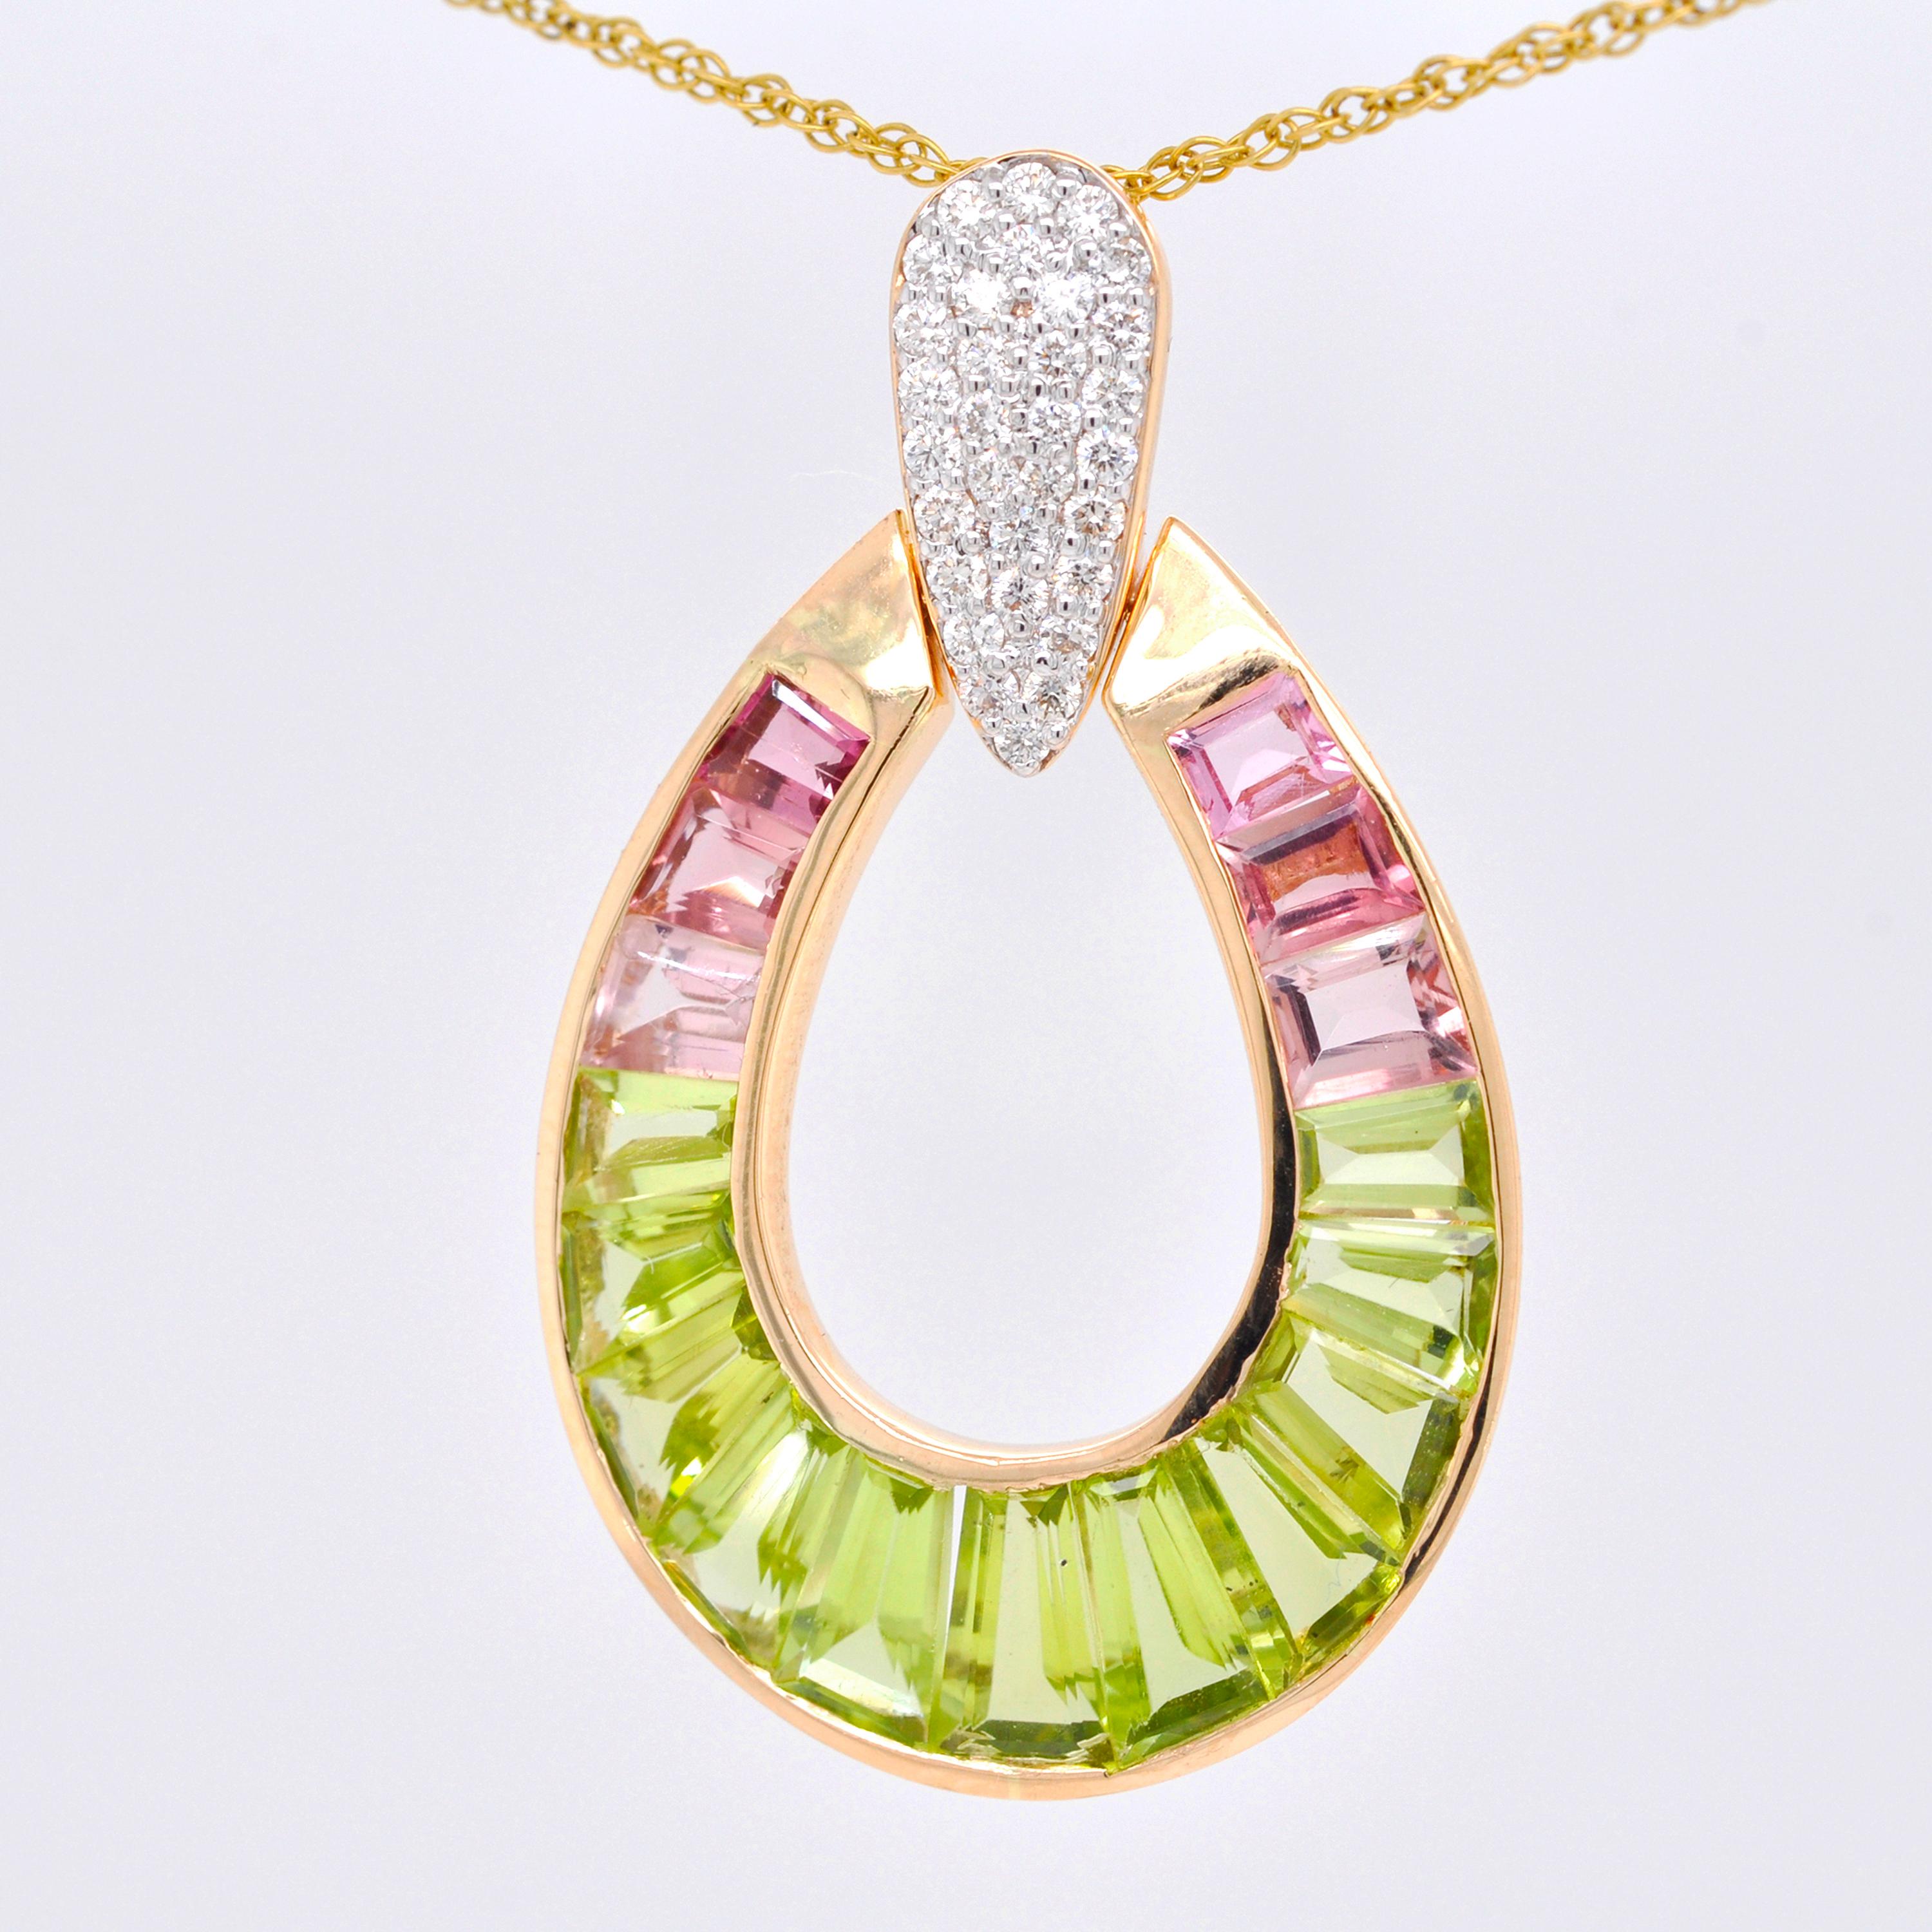 18K Gold Peridot Pink Tourmaline Raindrop Diamond Pendant Necklace In New Condition For Sale In Jaipur, Rajasthan